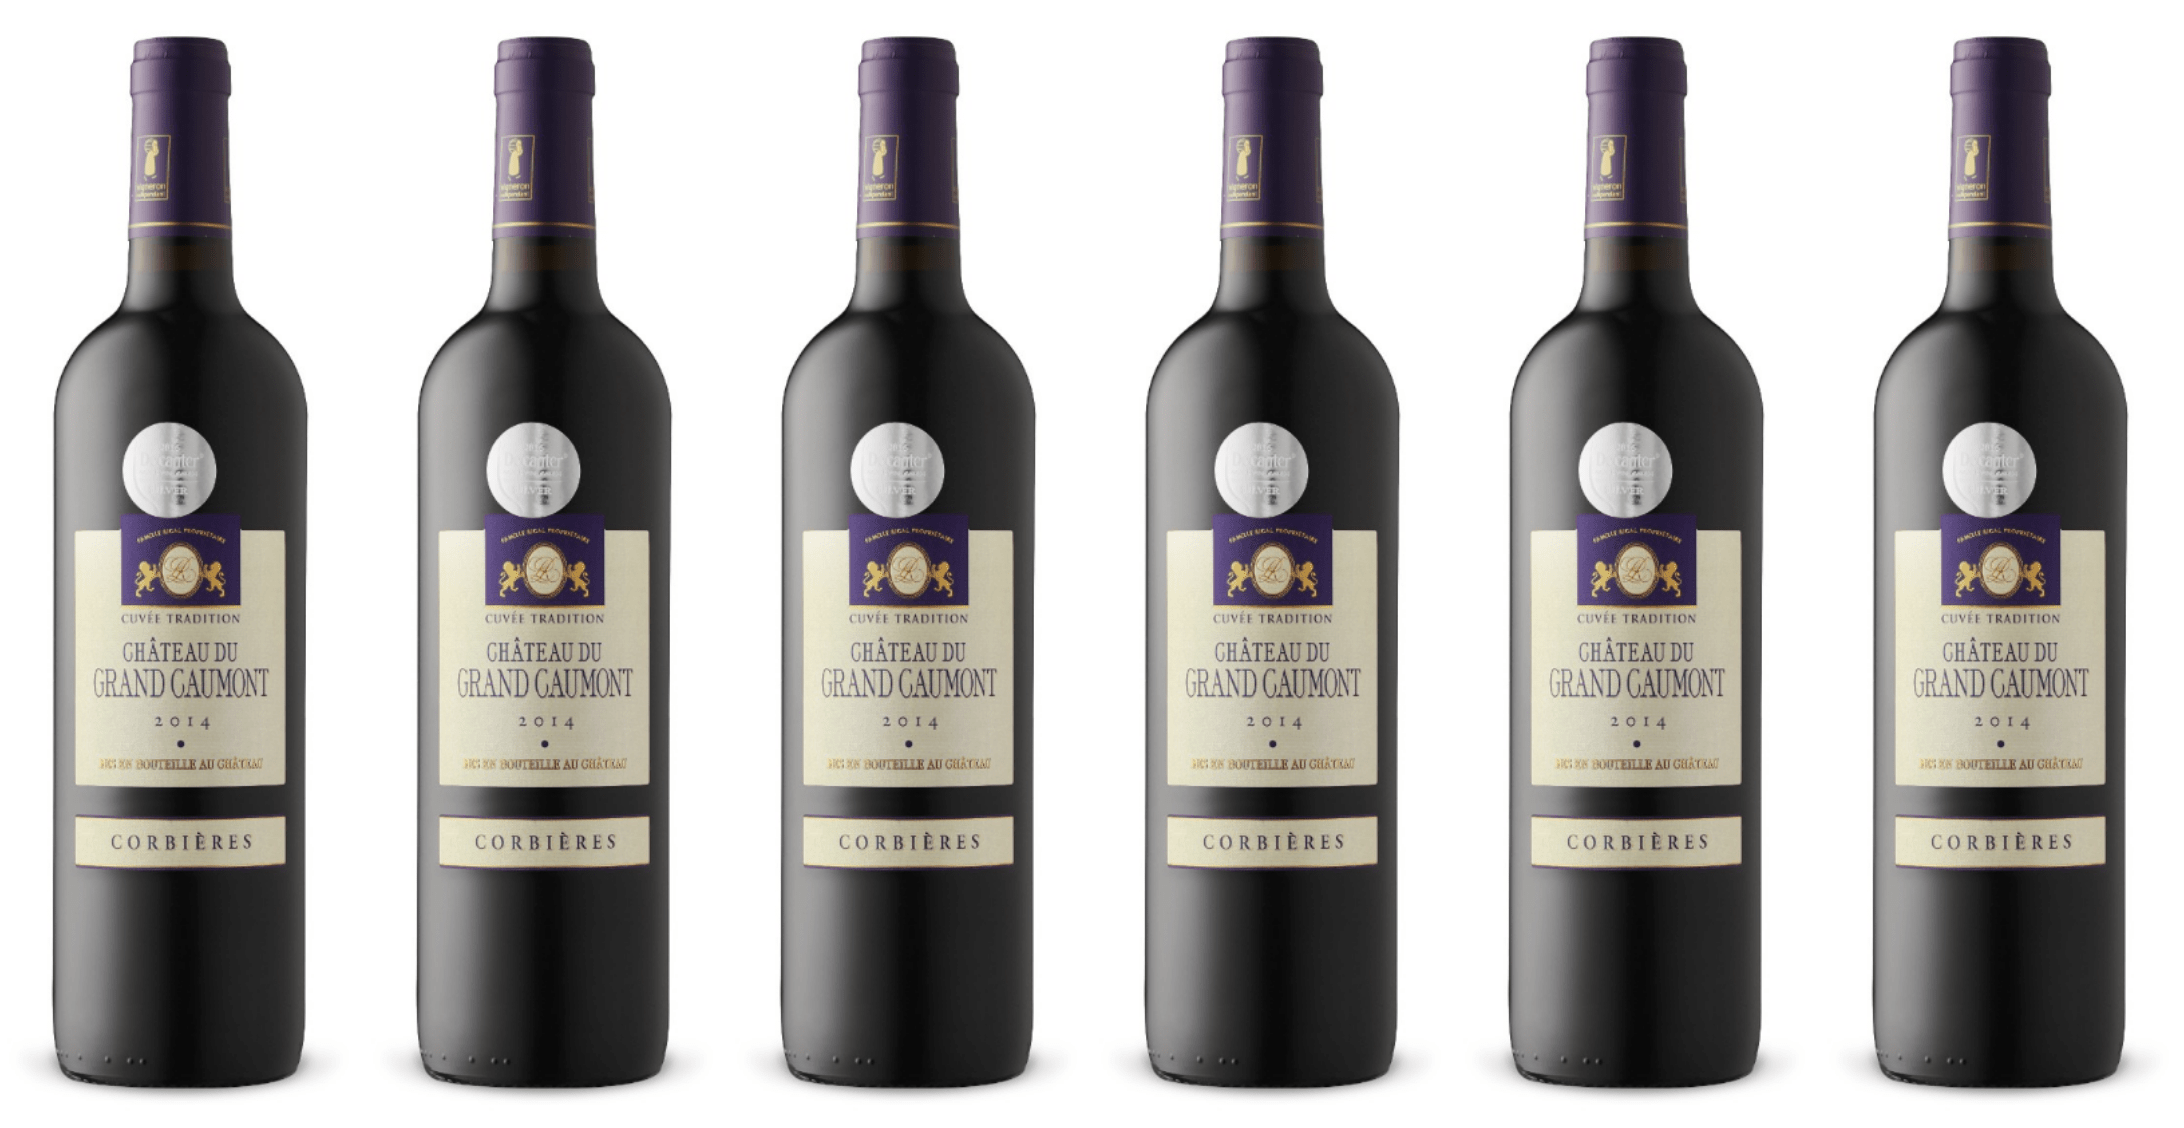 Try This : A Great Value Corbières From Château Du Grand Caumont